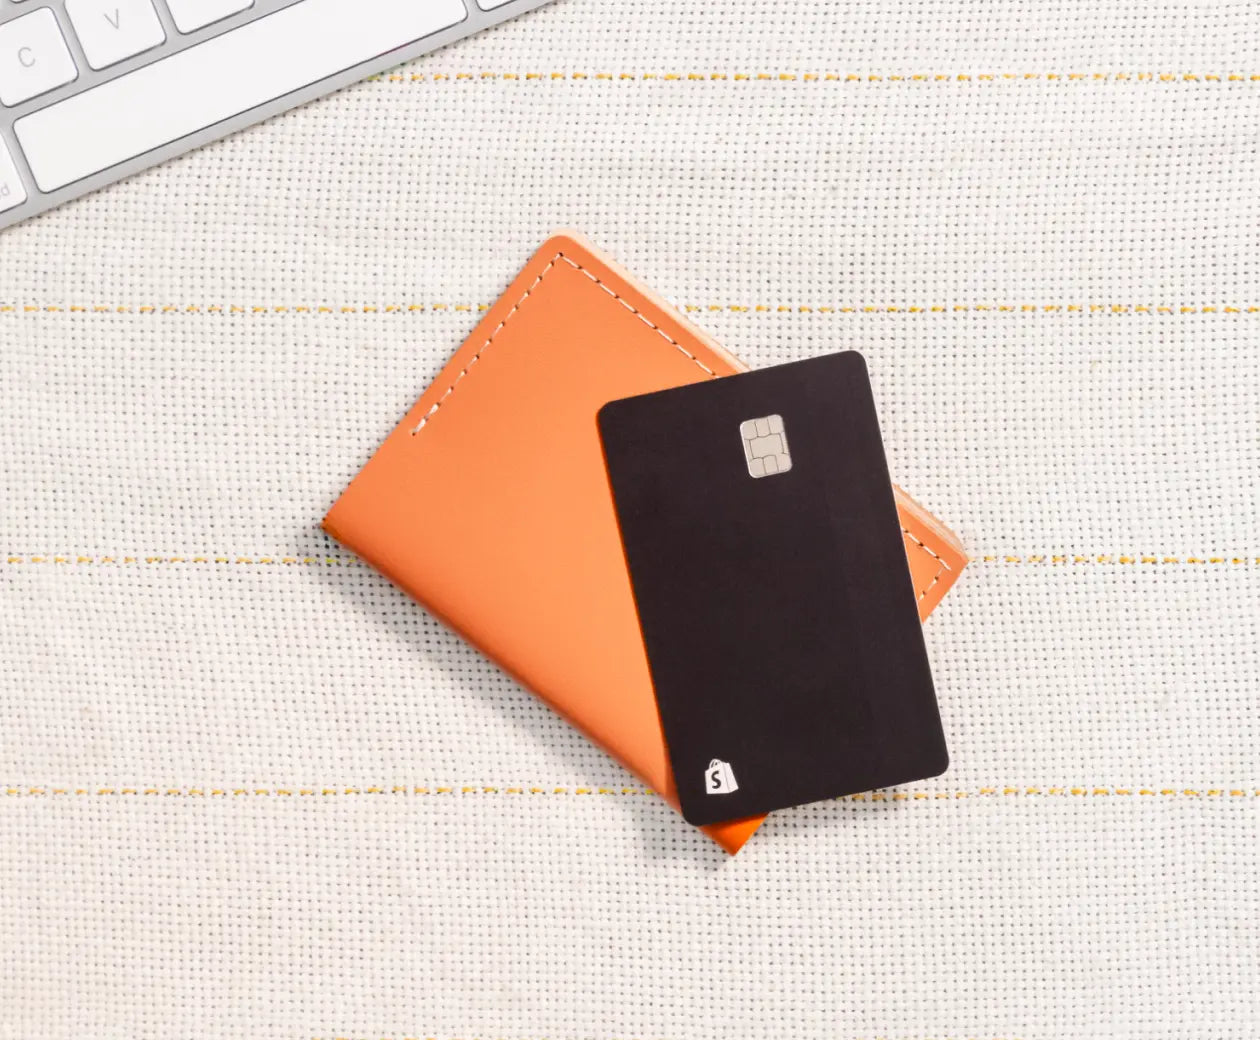 A leather wallet and black Shopify Balance card sit on a striped desk.